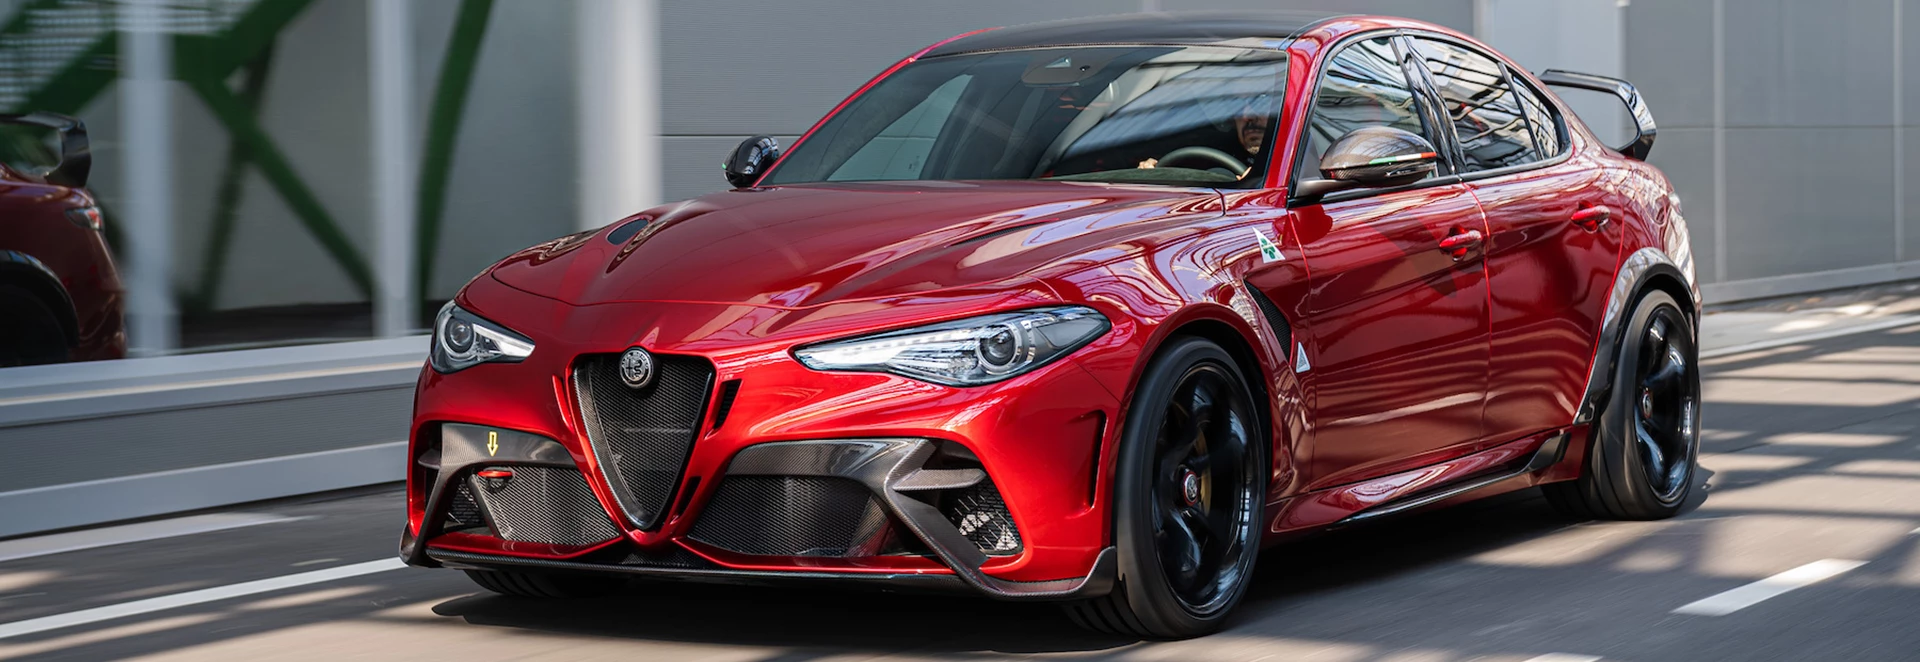 Everything you need to know about the 2021 Alfa Romeo Giulia GTA 